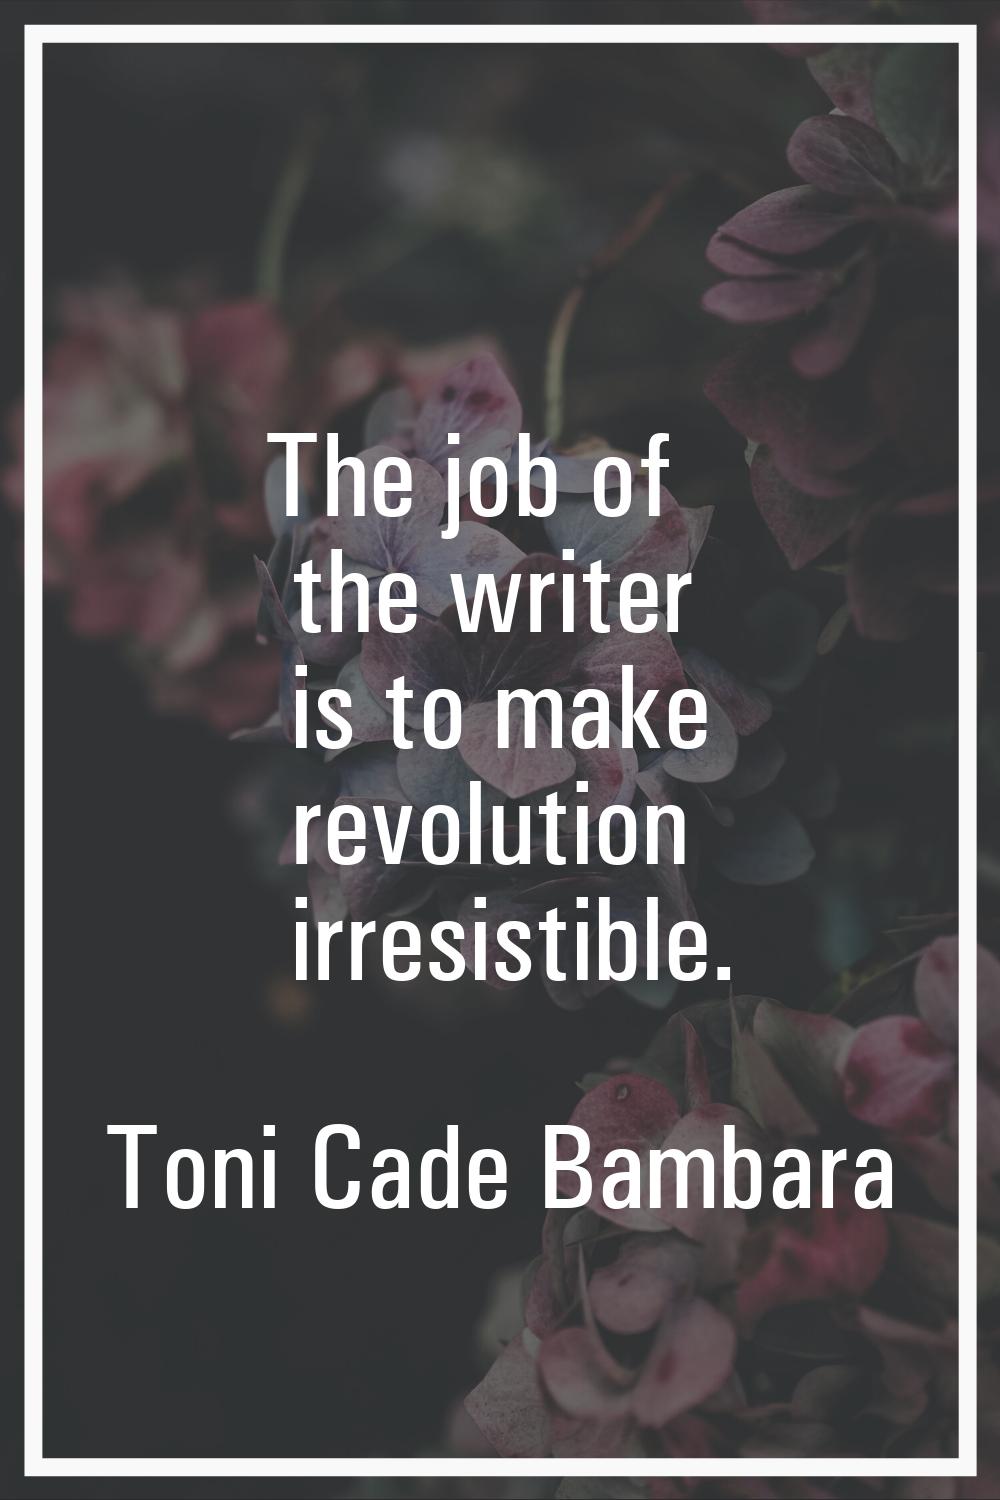 The job of the writer is to make revolution irresistible.